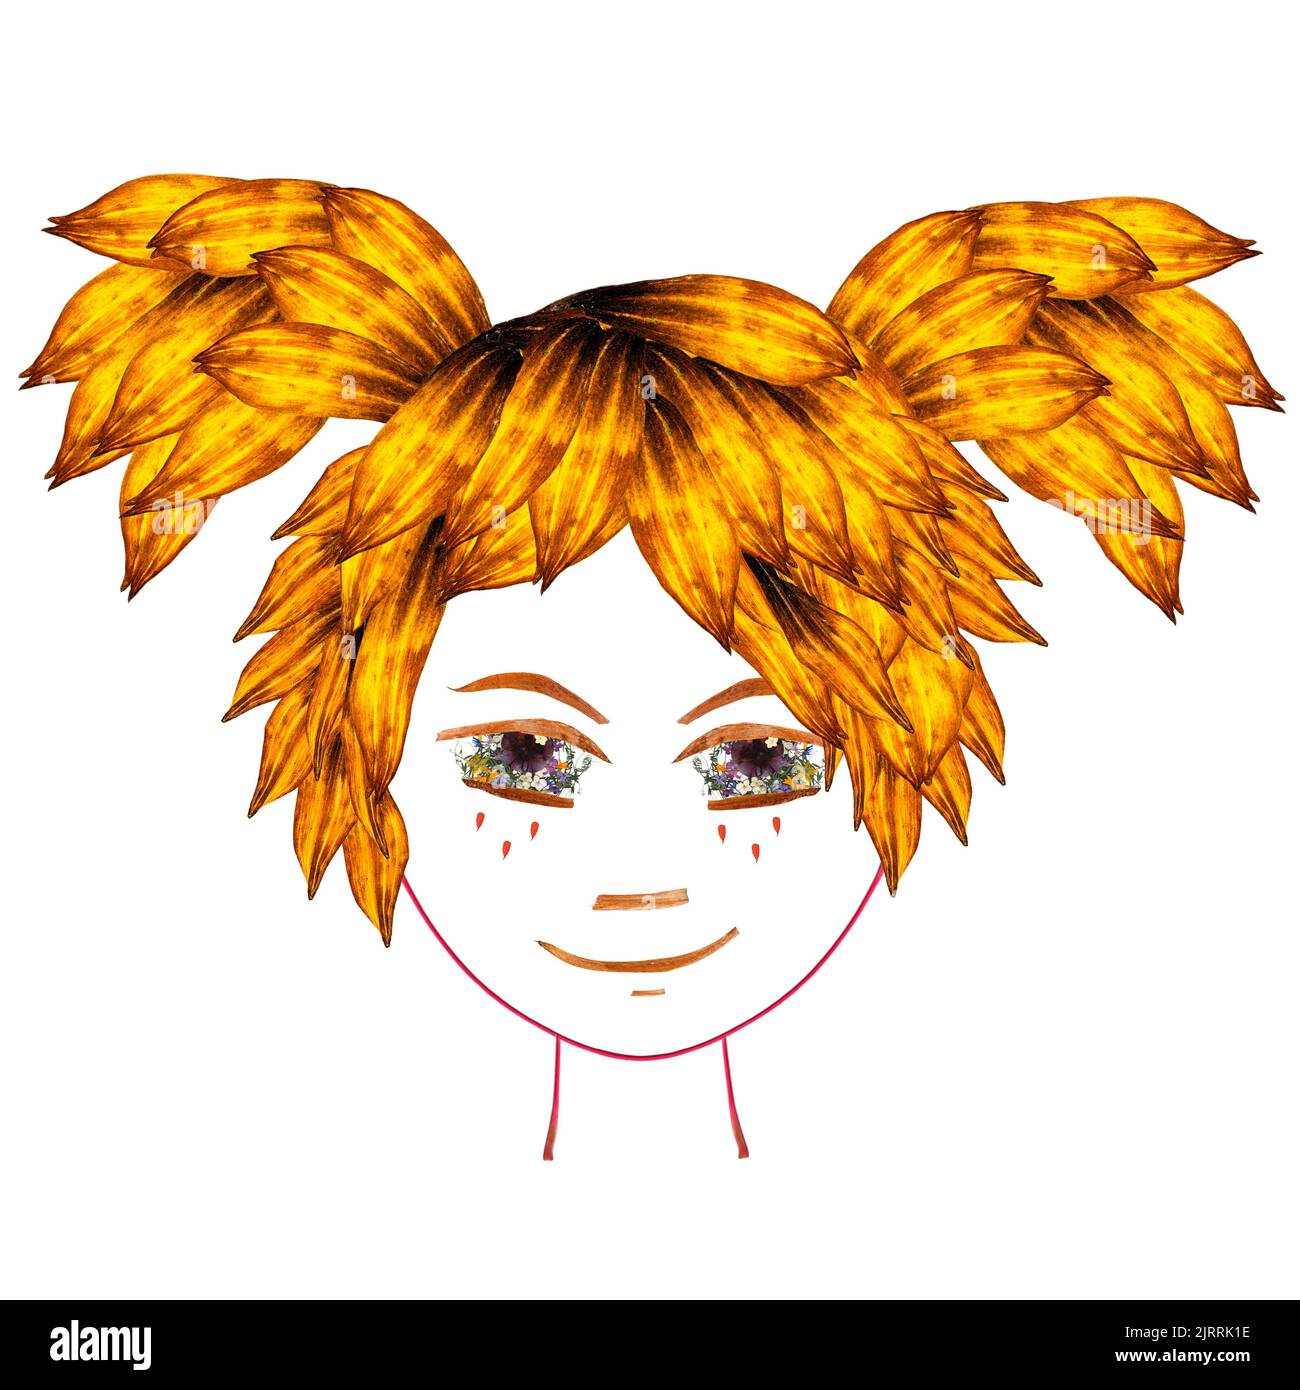 Application, face made of dried pressing multicolor Columbine flowers, long stiff brown iris. Small yellow butterfly in orange hair from elm transpare Stock Photo